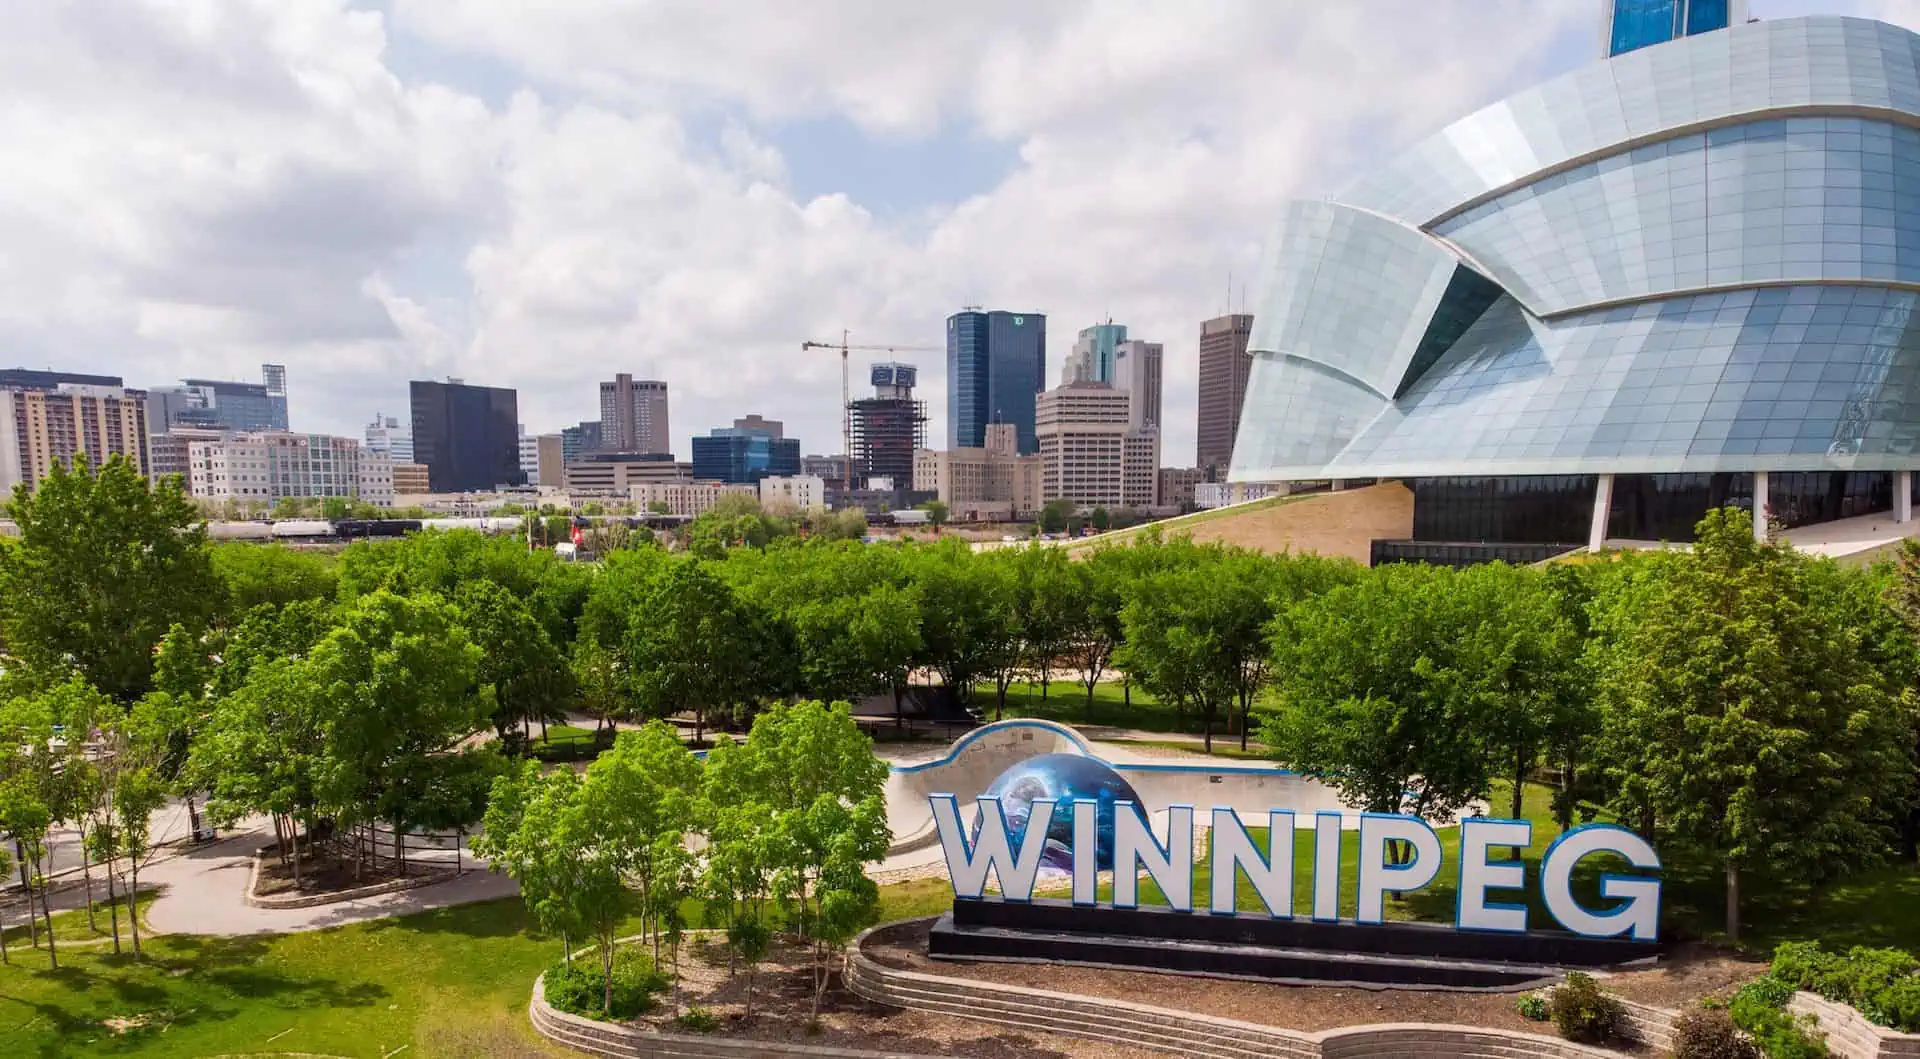 Winnipeg, Manitoba skyline with buildings, trees and the Winnipeg sign; visited on a Canada road trip